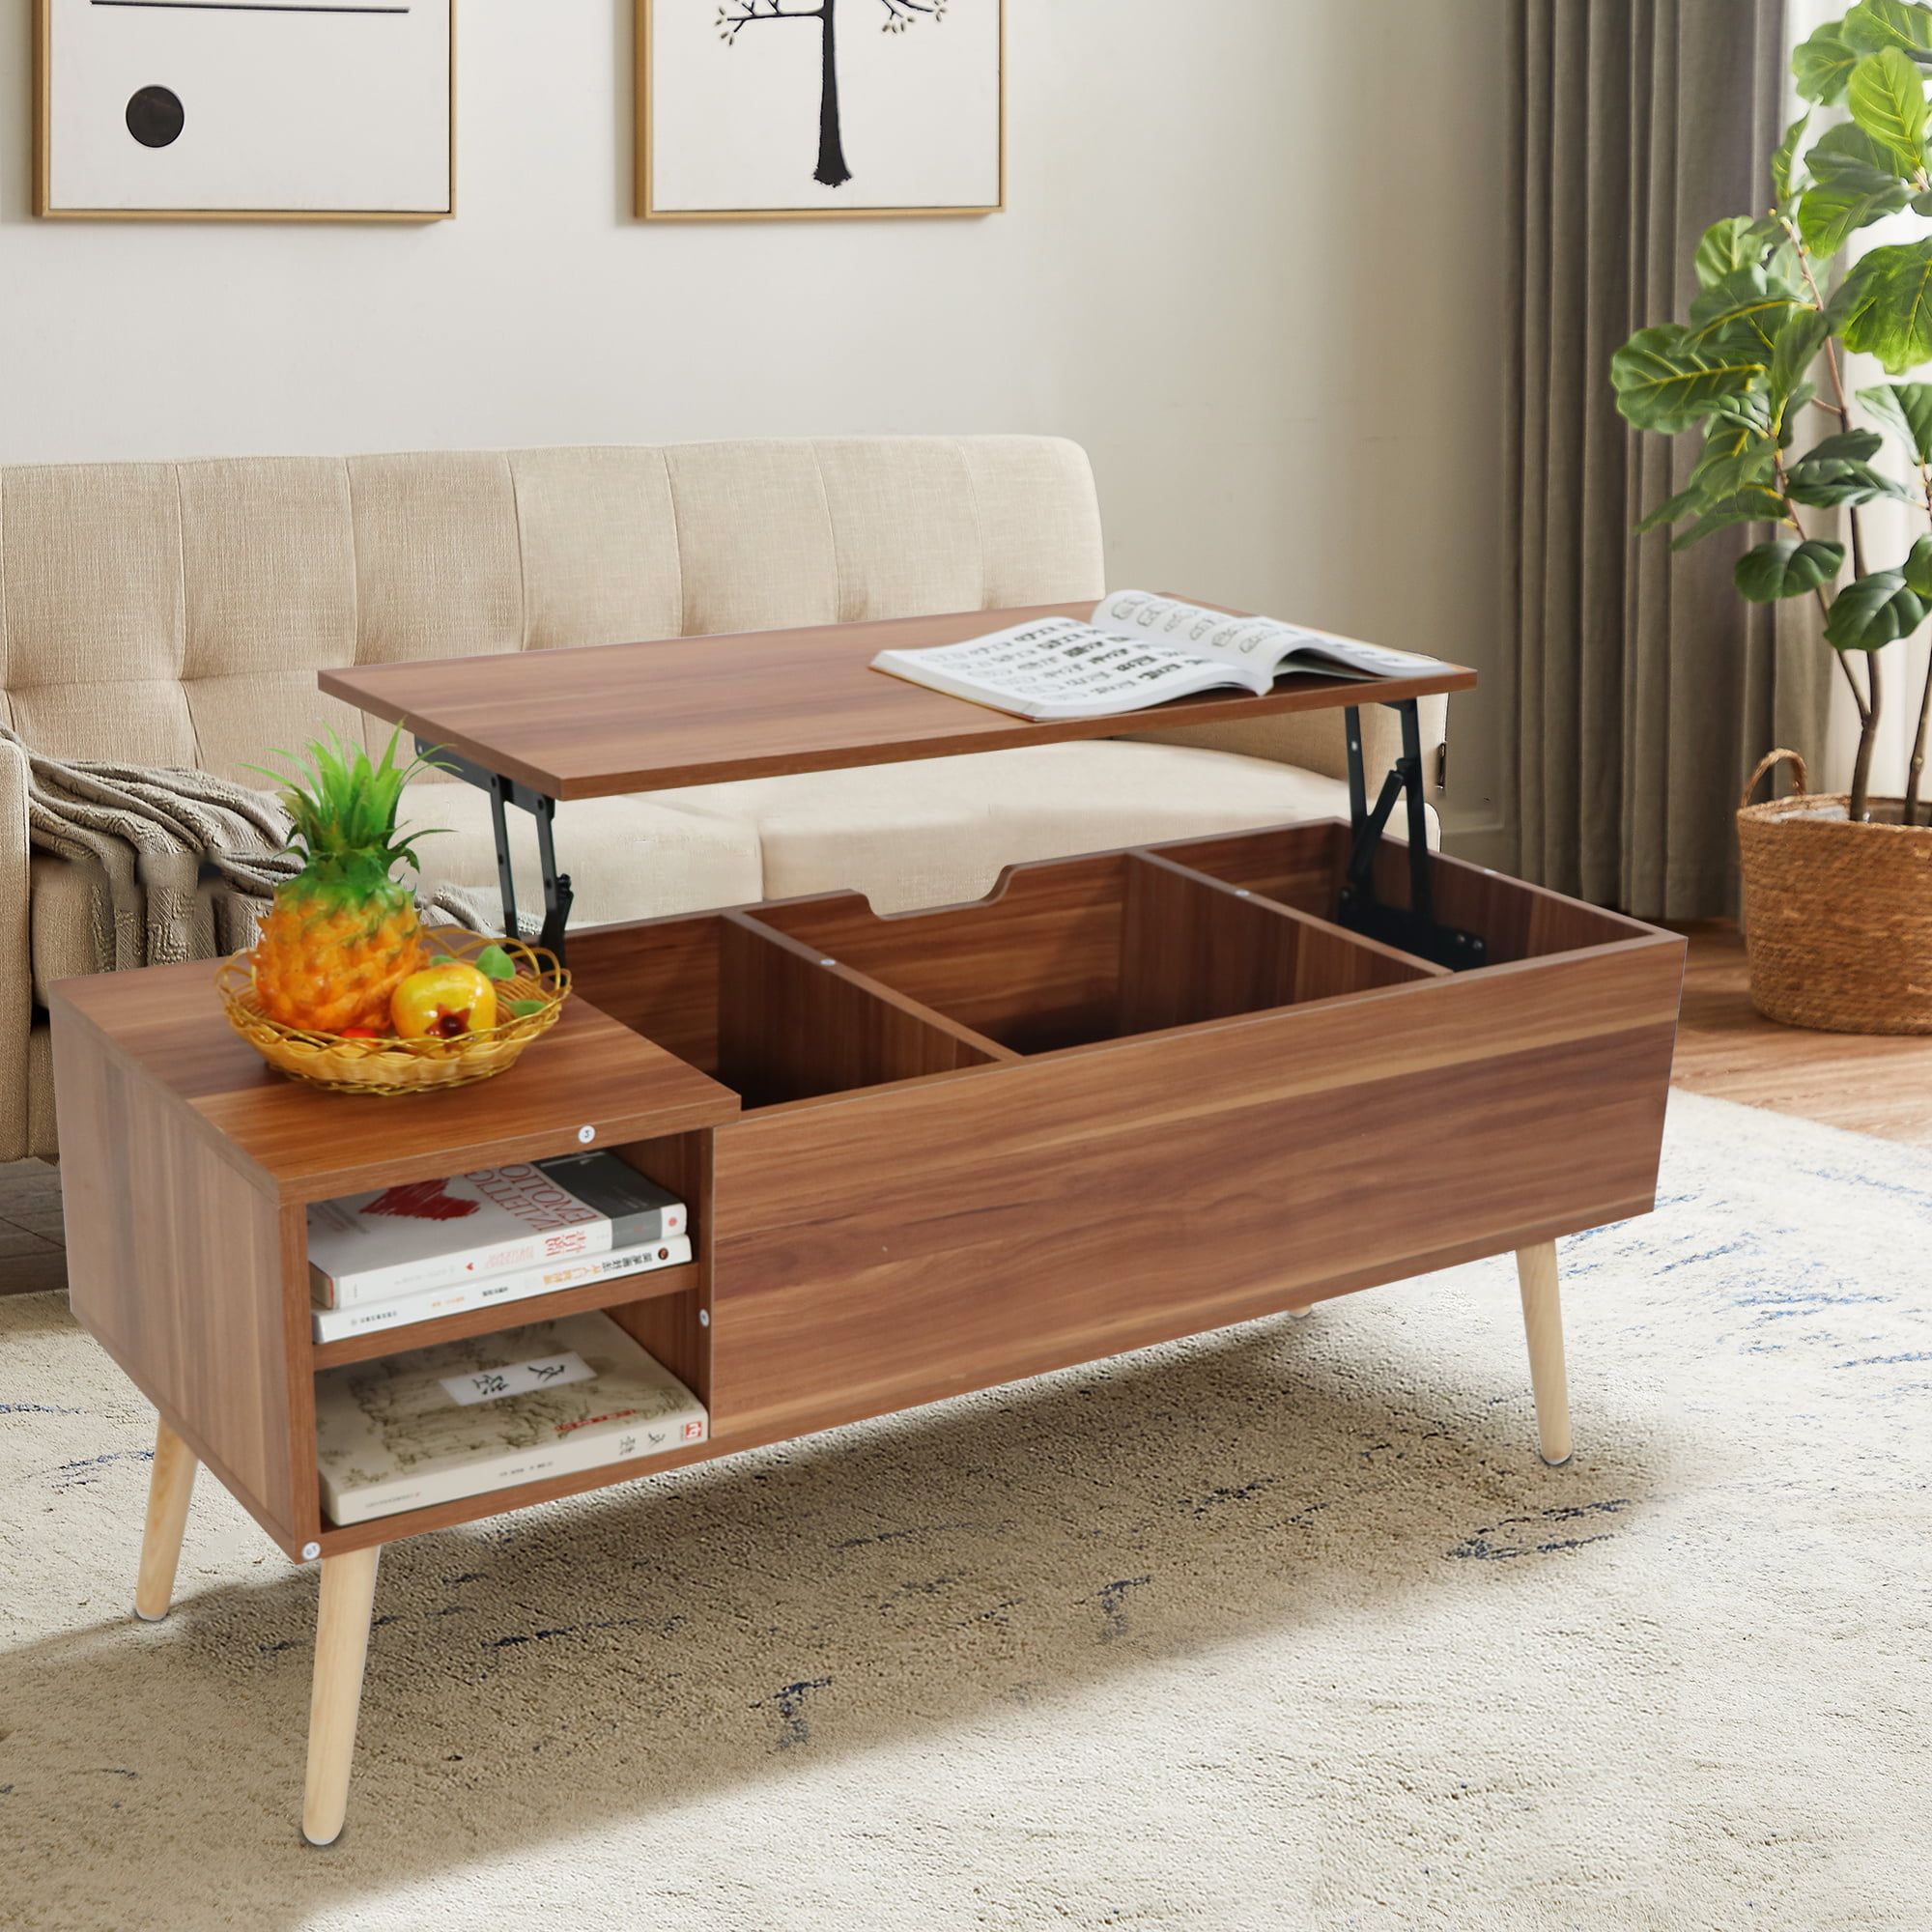 Aukfa Mid Century Modern Wooden Lift Top Coffee Table, Rosewood –  Walmart Inside Lift Top Coffee Tables With Storage Drawers (View 5 of 15)